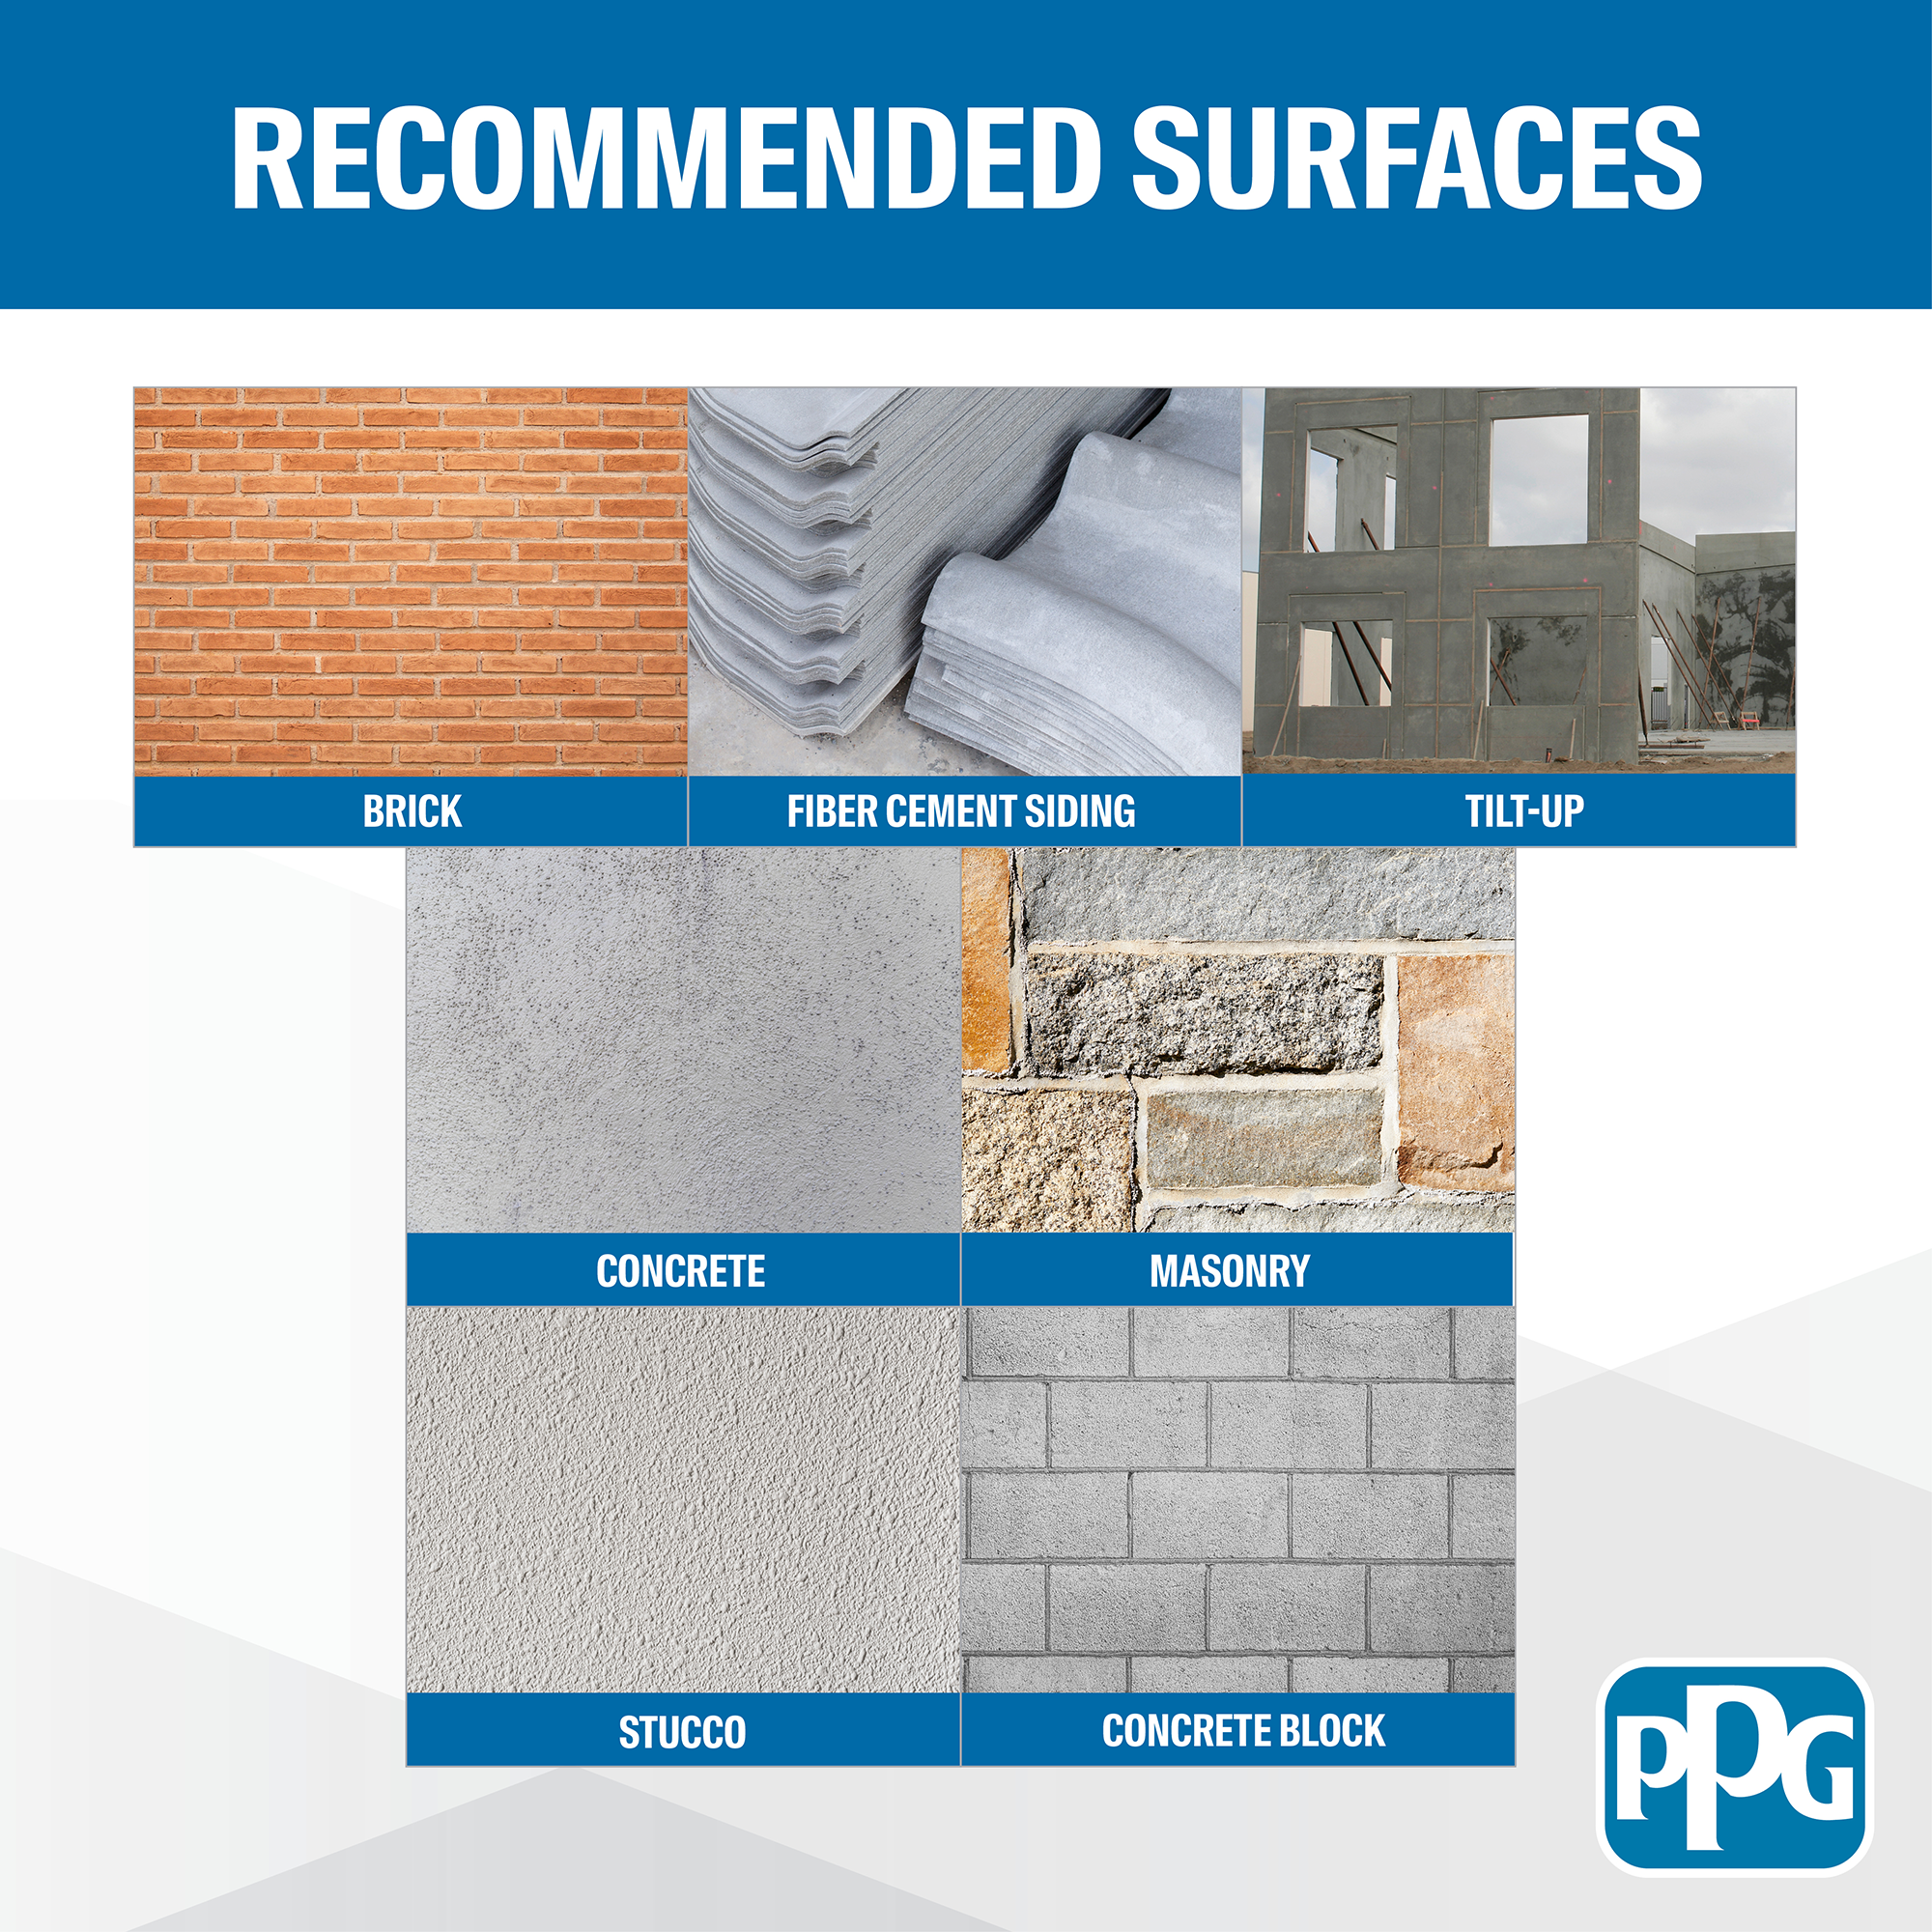 100% Acrylic Texture Recommended Surfaces